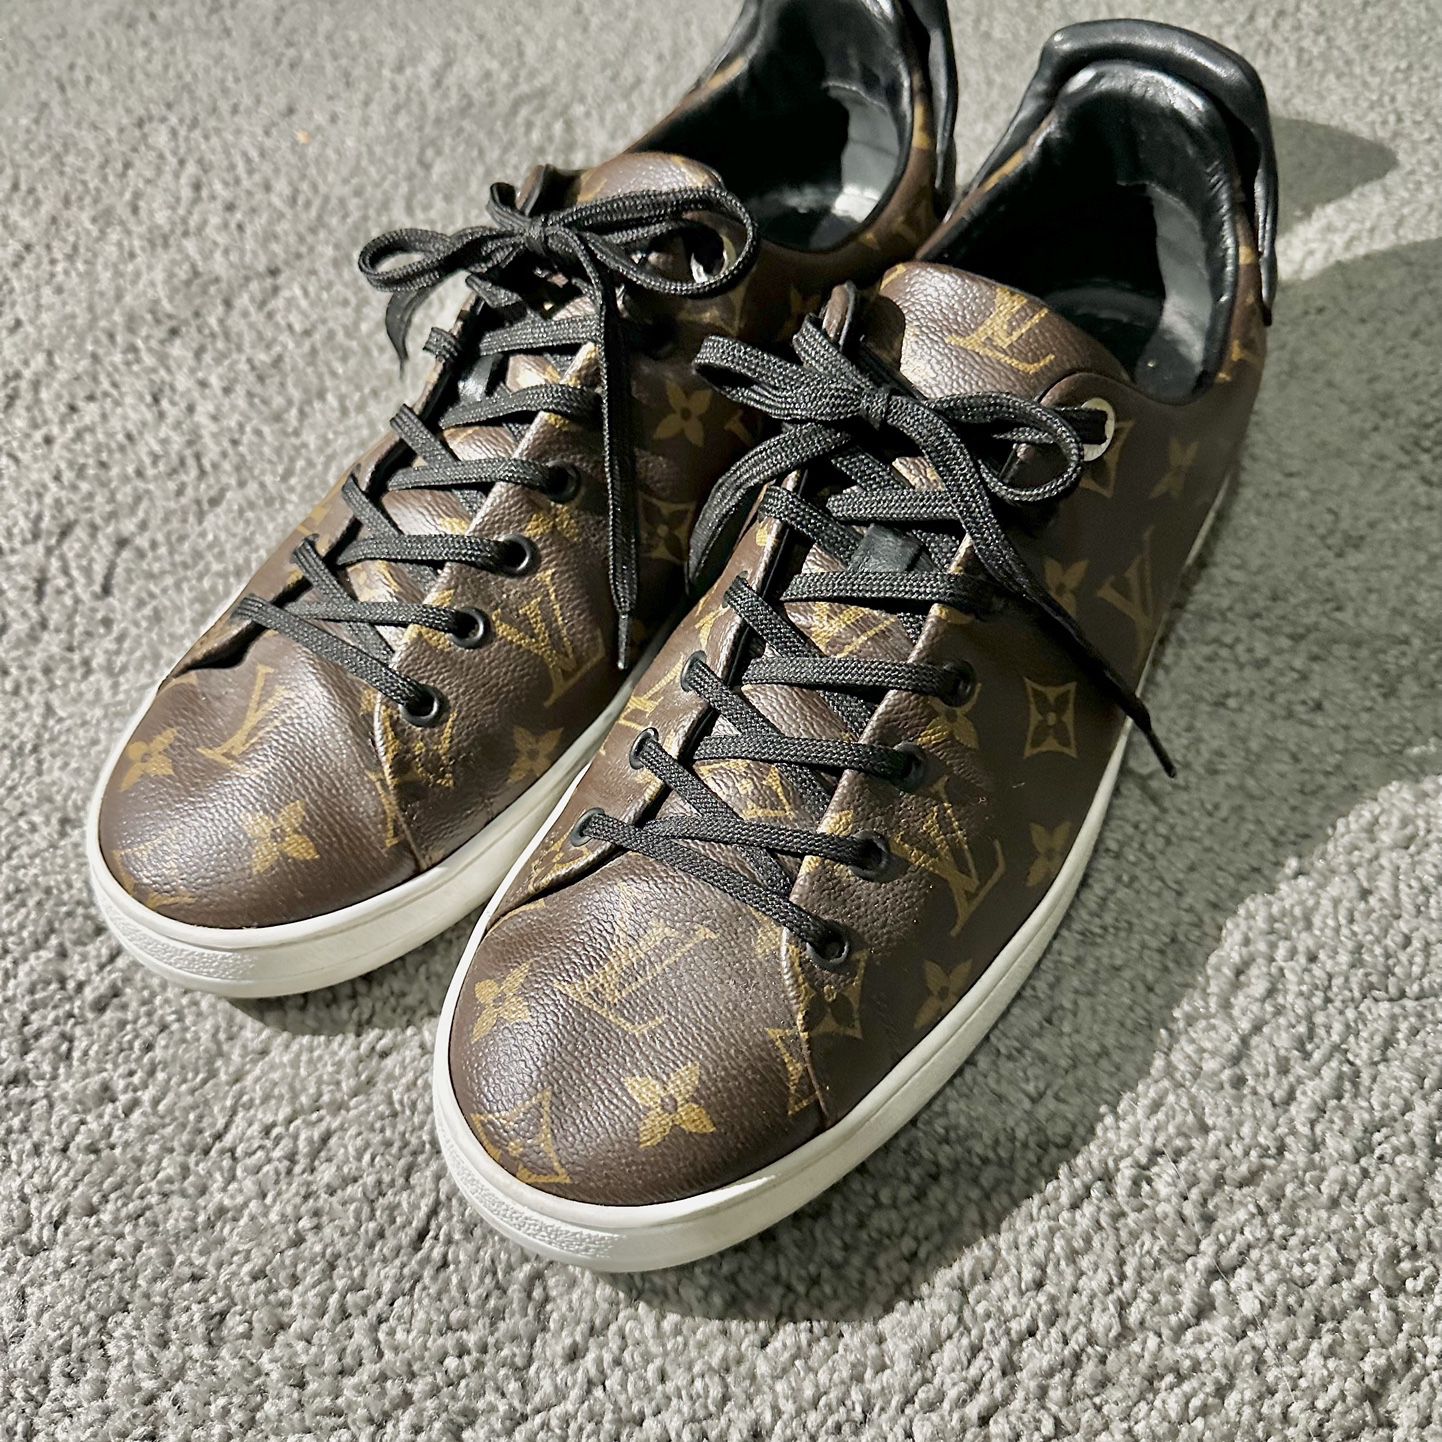 Louis Vuitton Sneakers Brand New With Box And Dust Bag. Men Size 8, 9, 10,  11. Pickup. 320$ for Sale in Houston, TX - OfferUp